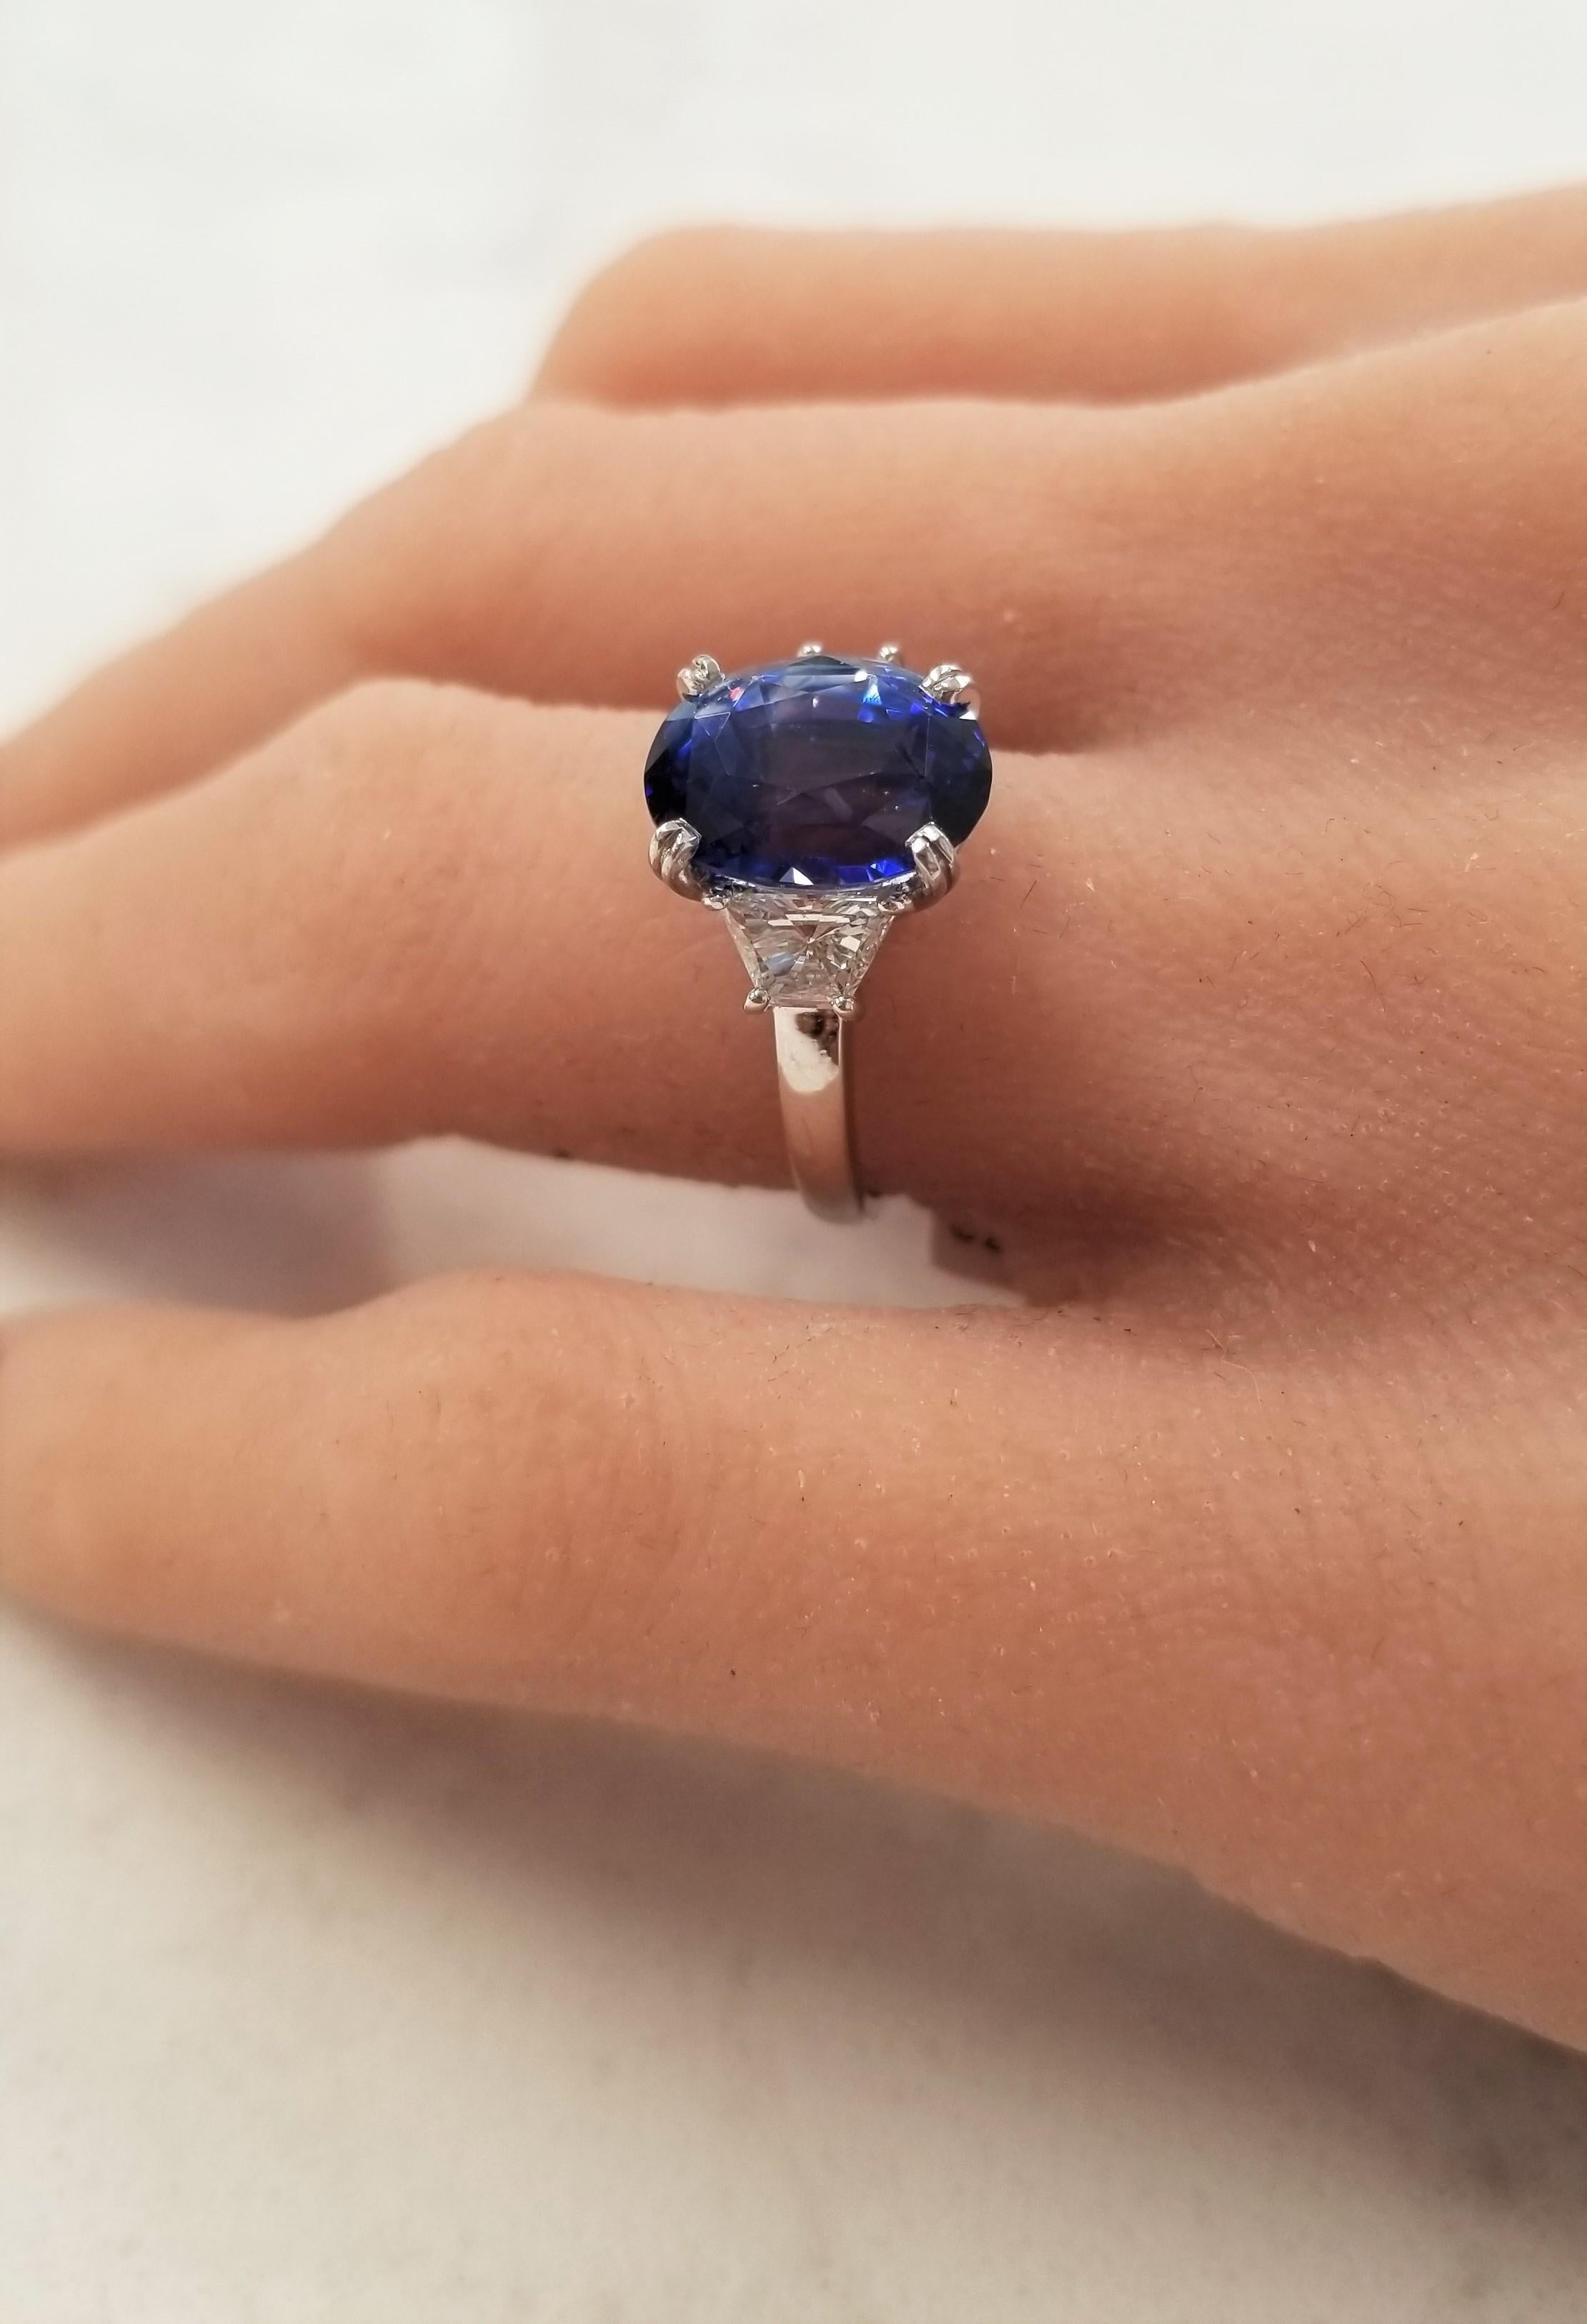 The spotlight is the 5.70 carat elongated cushion cut blue sapphire. The gem source is Sri Lanka; its color is royal blue; its transparency and luster is superb. The color is alluring and is evenly distributed throughout the gem. Two step-cut